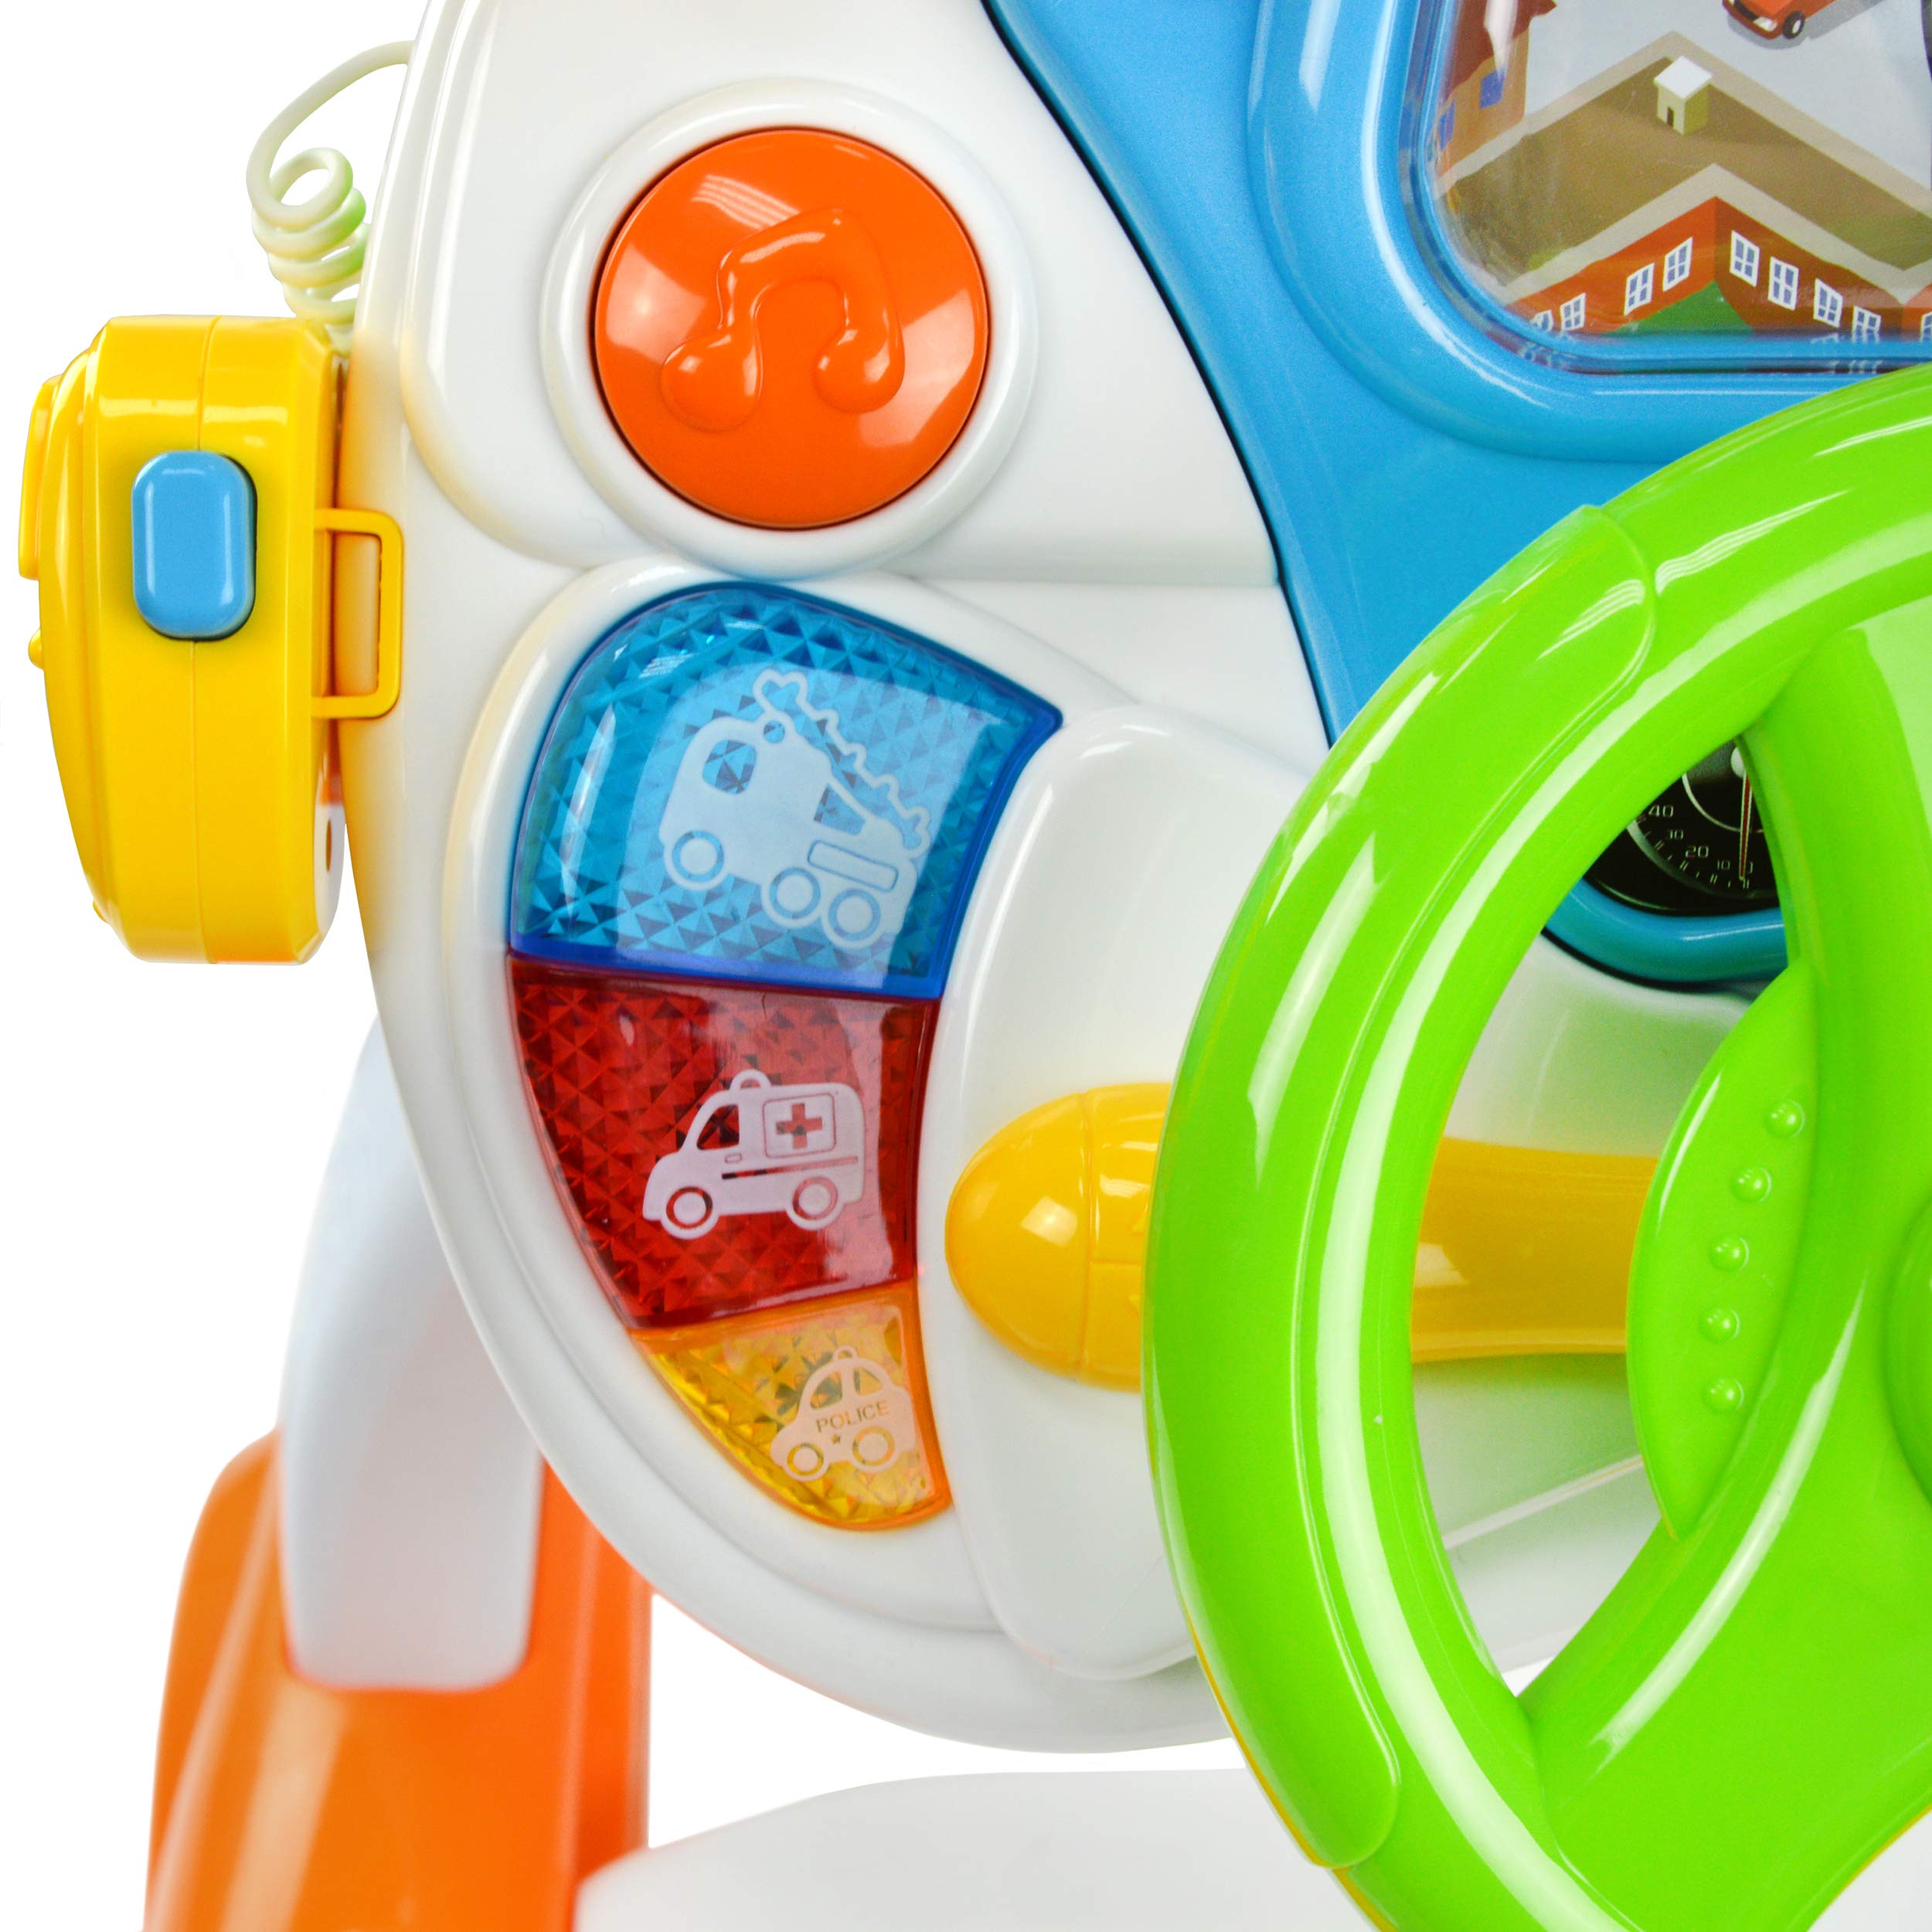 Baby Interactive Simulation Toys - Play Pretend Realistic Driving Play Station for Toddlers and Young Children - Battery Operated - Lights up with Sounds